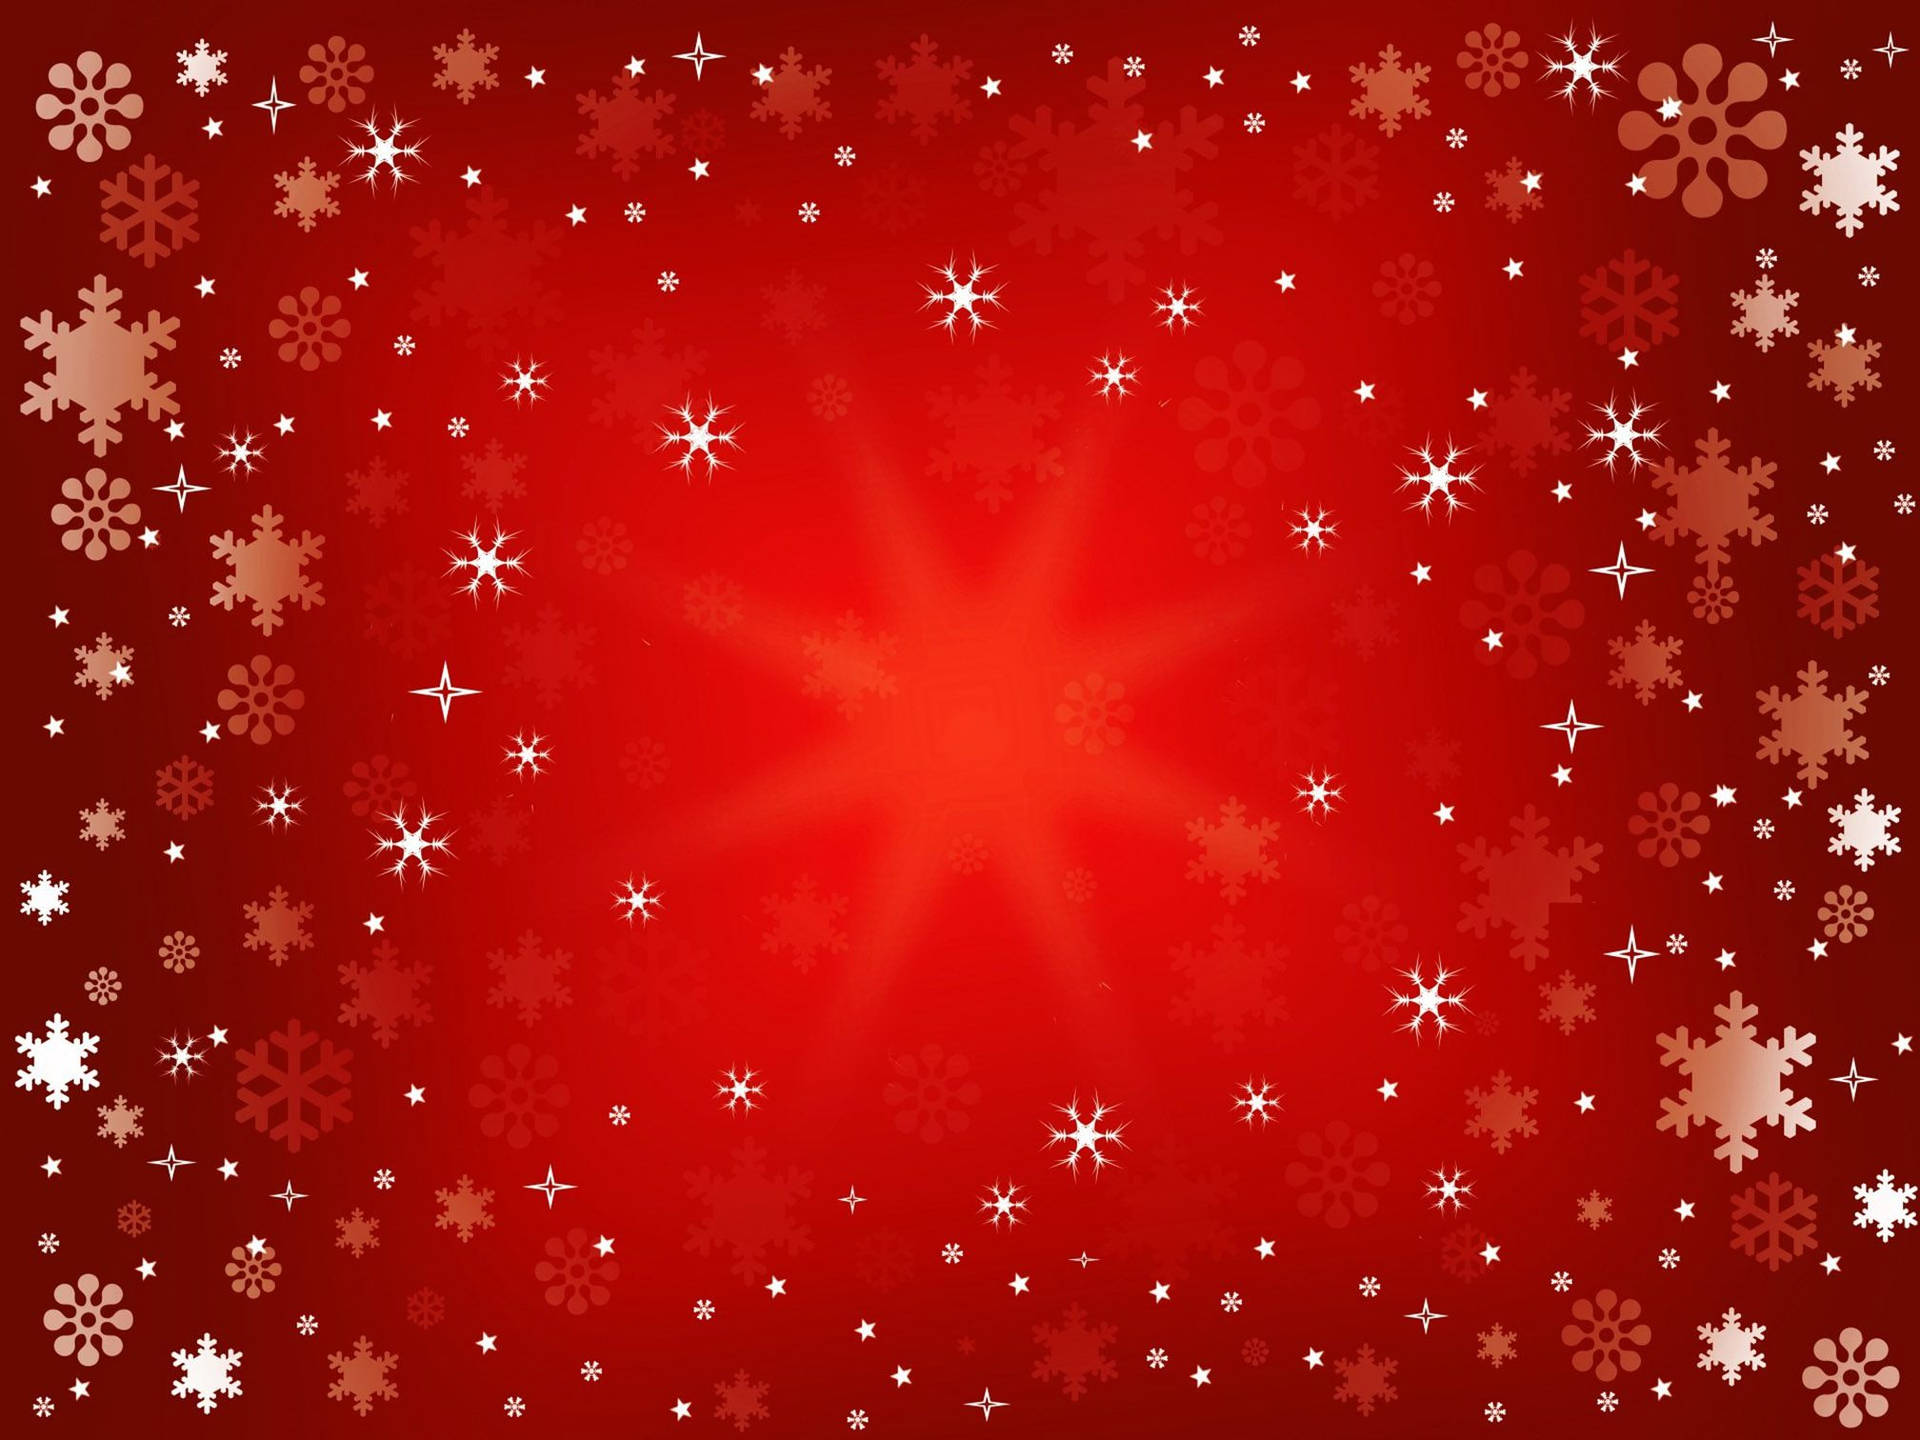 Sparkly Red Christmas Background Wallpaper